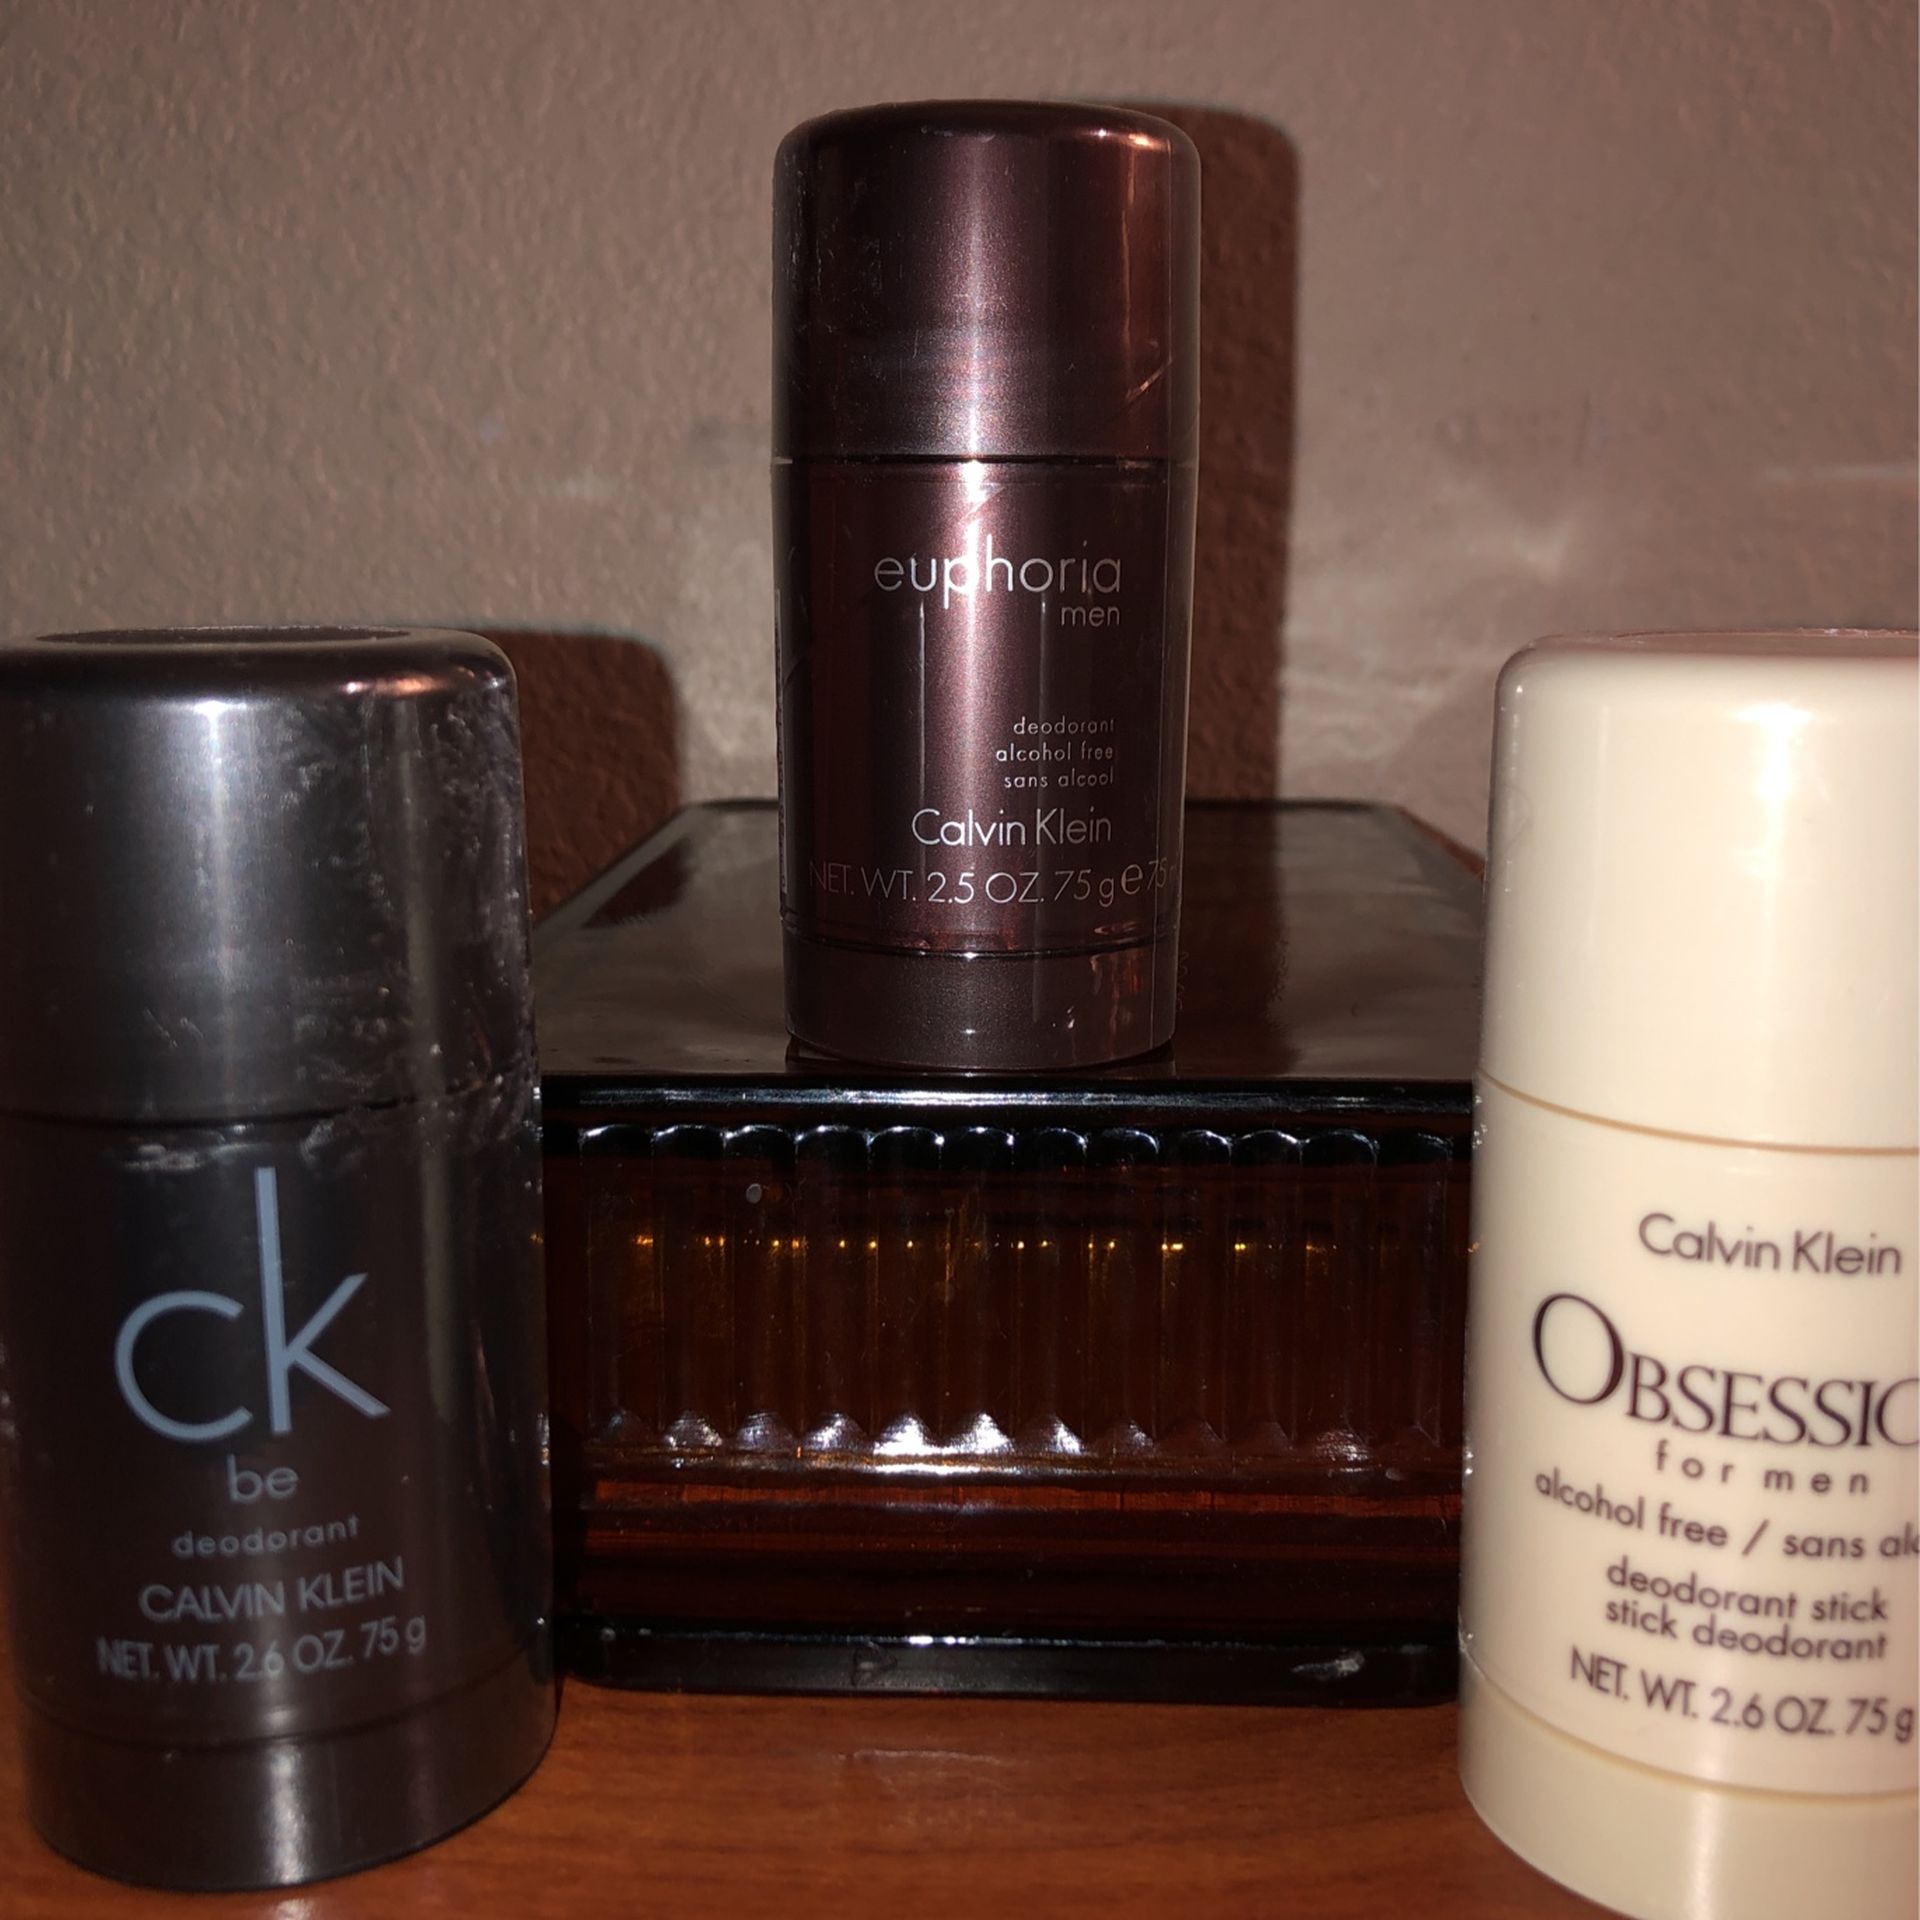 Brand NEW!!! 🔘   Calvin Klein - Deodorant Sticks - Obsession / euphoria / ck be (((PENDING PICK UP TODAY 5-6pm)))